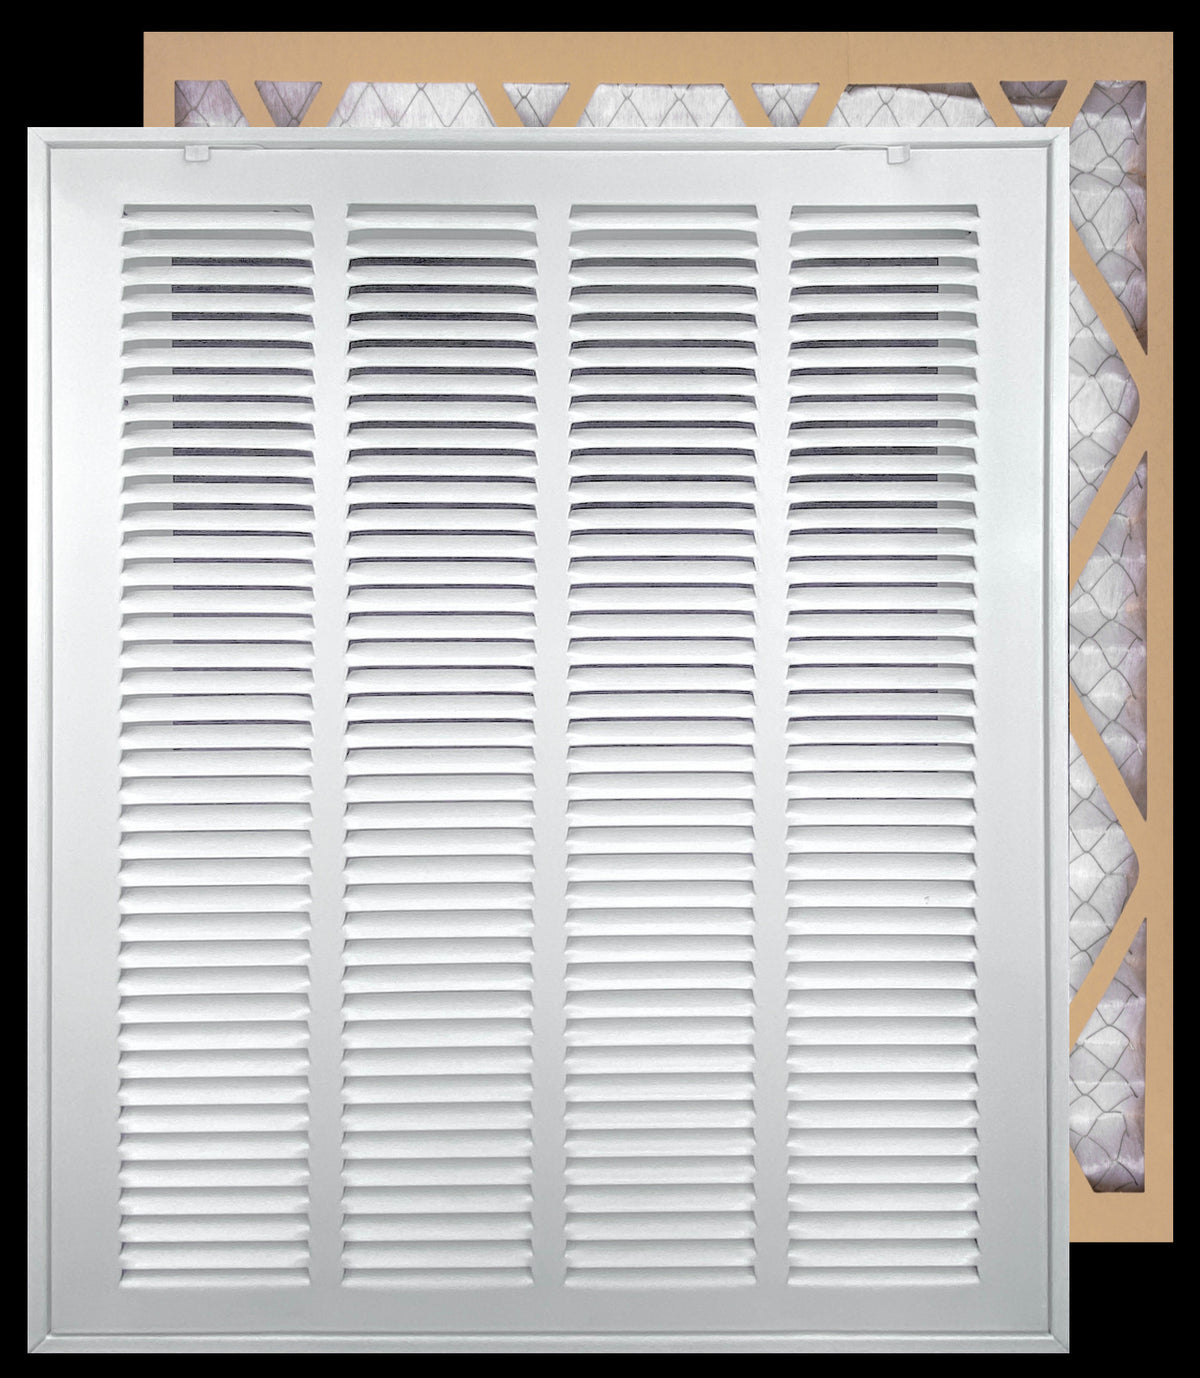 airgrilles 20" x 30" duct opening   filter included hd steel return air filter grille for sidewall and ceiling fil-7rafg1-wh-20x30 038775643924 - 1